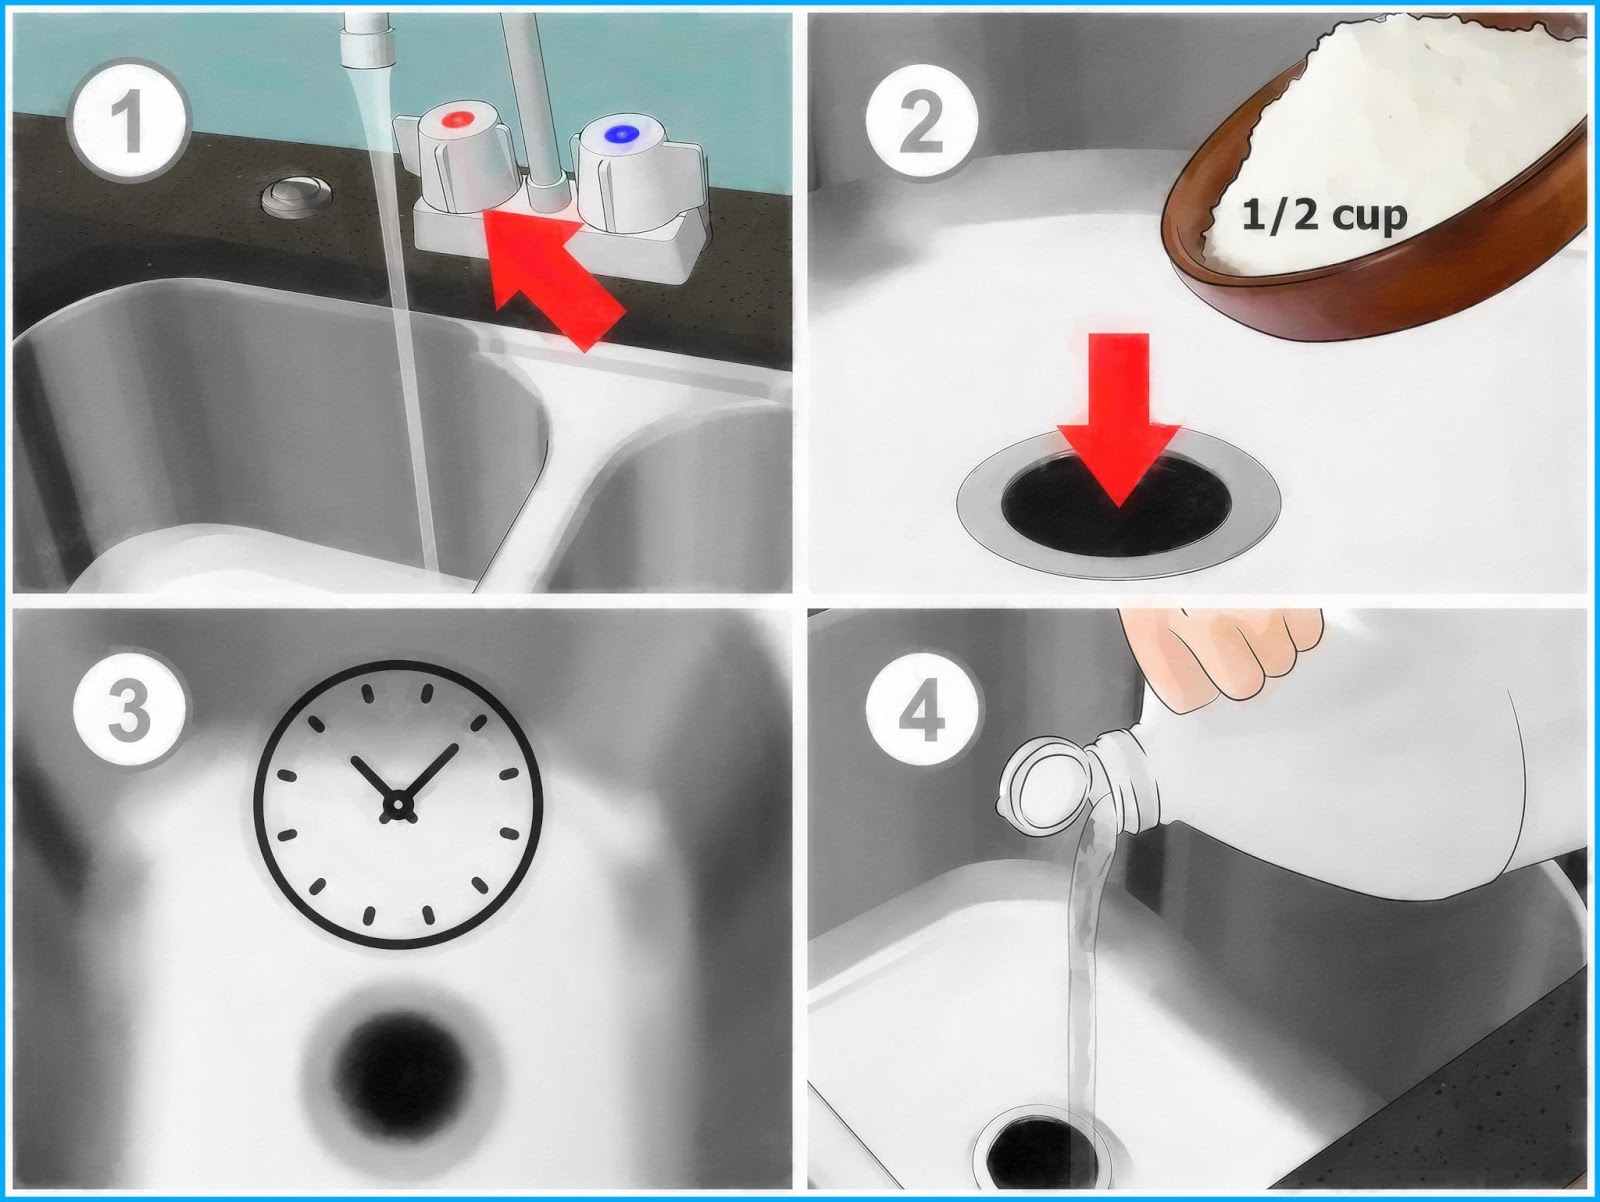 16 Fix Clogged Kitchen Sink With Disposal  Ways to Unclog a Kitchen Sink Fix,Clogged,Kitchen,Sink,Disposal